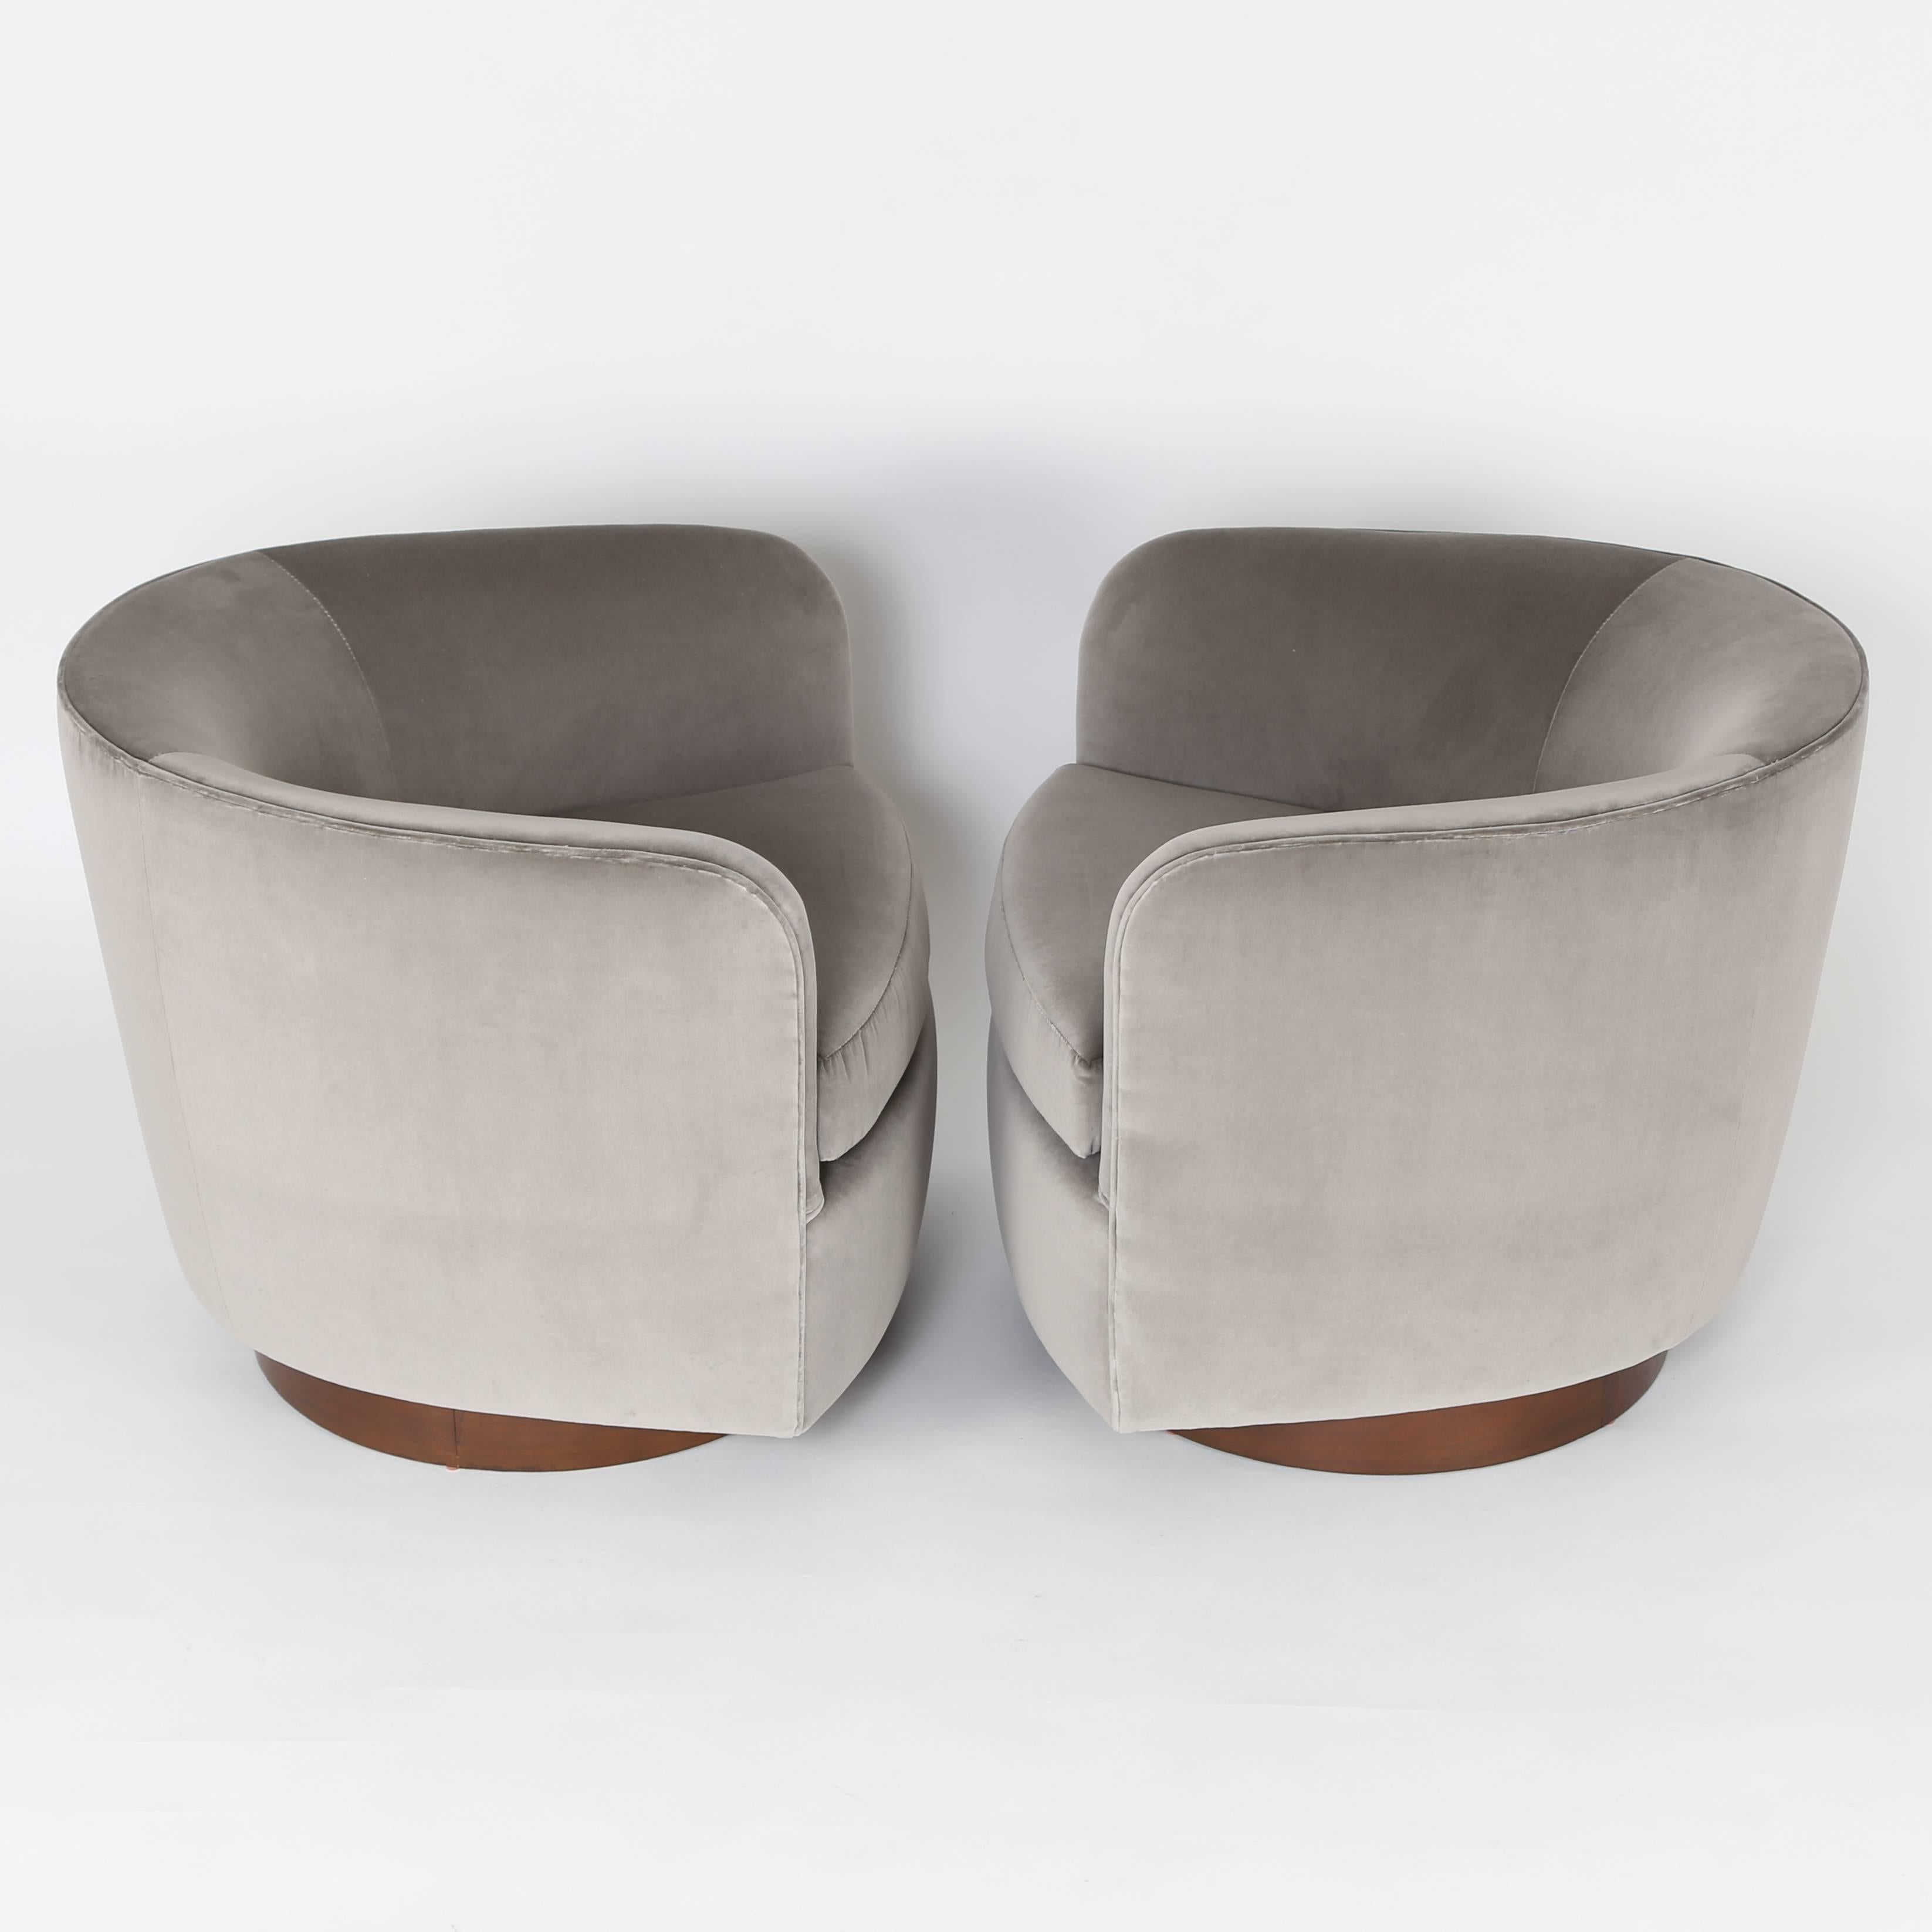 American Pair of 1970s Milo Baughman Tilt and Swivel Lounge Chairs with Walnut Bases